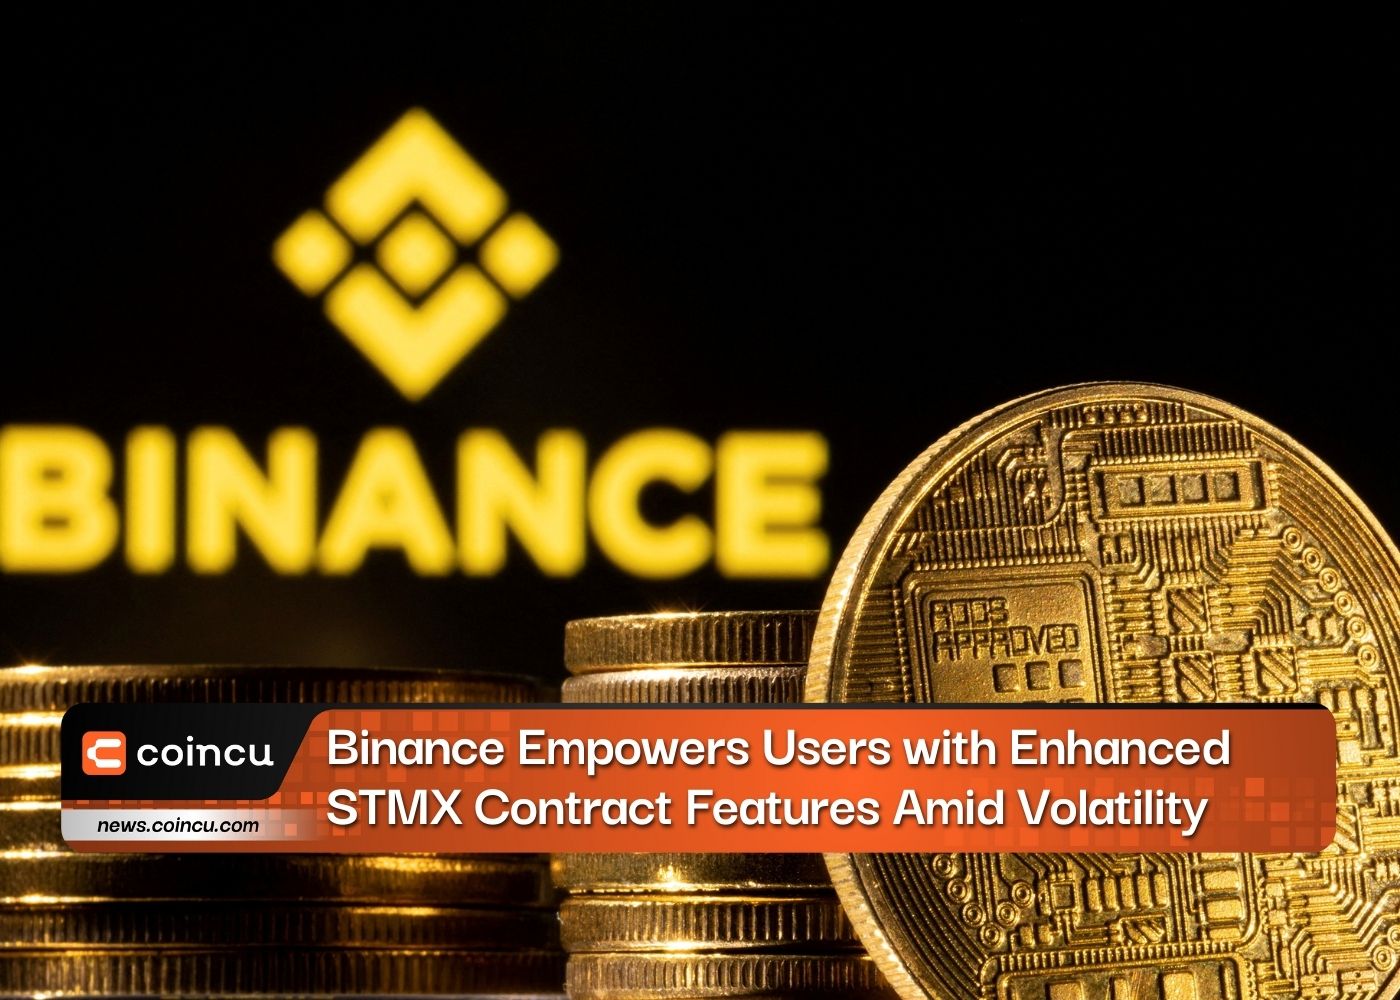 Binance Empowers Users with Enhanced STMX Contract Features Amid Volatility